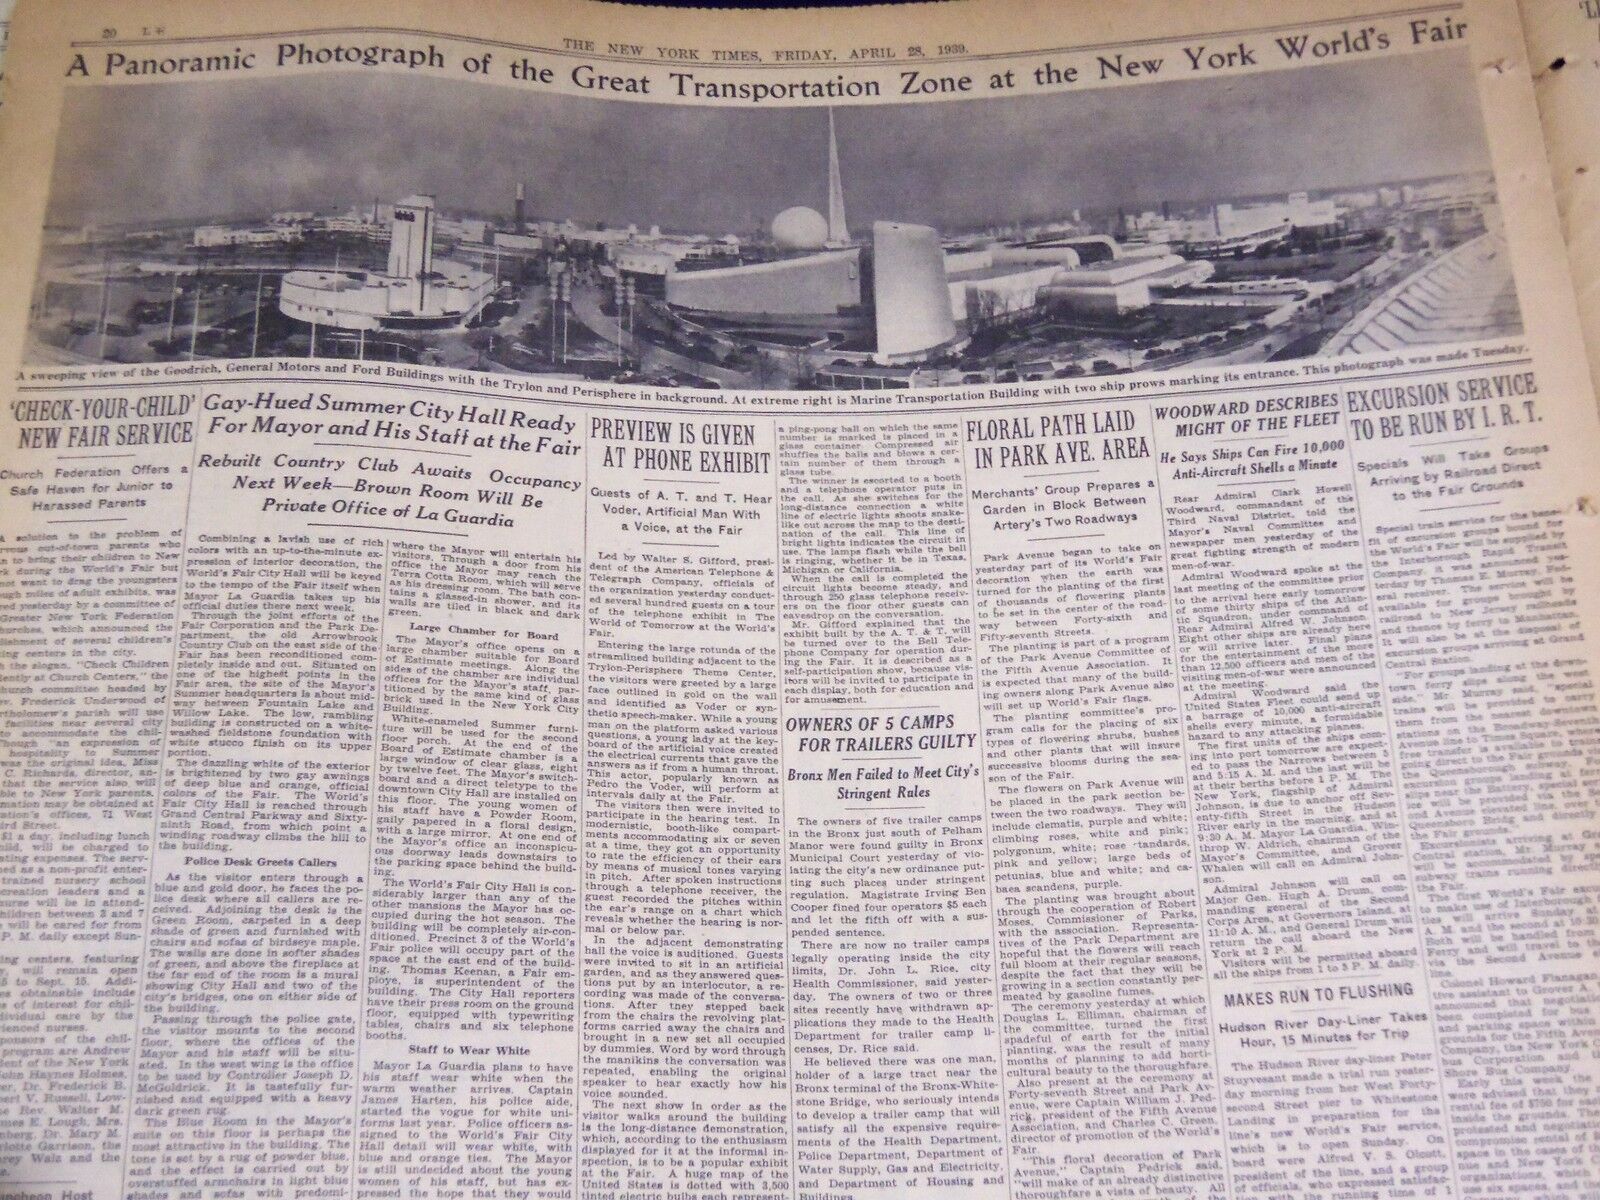 1939 APRIL 28 NEW YORK TIMES - FAIR NEARLY READY FOR OPENING - NT 3043